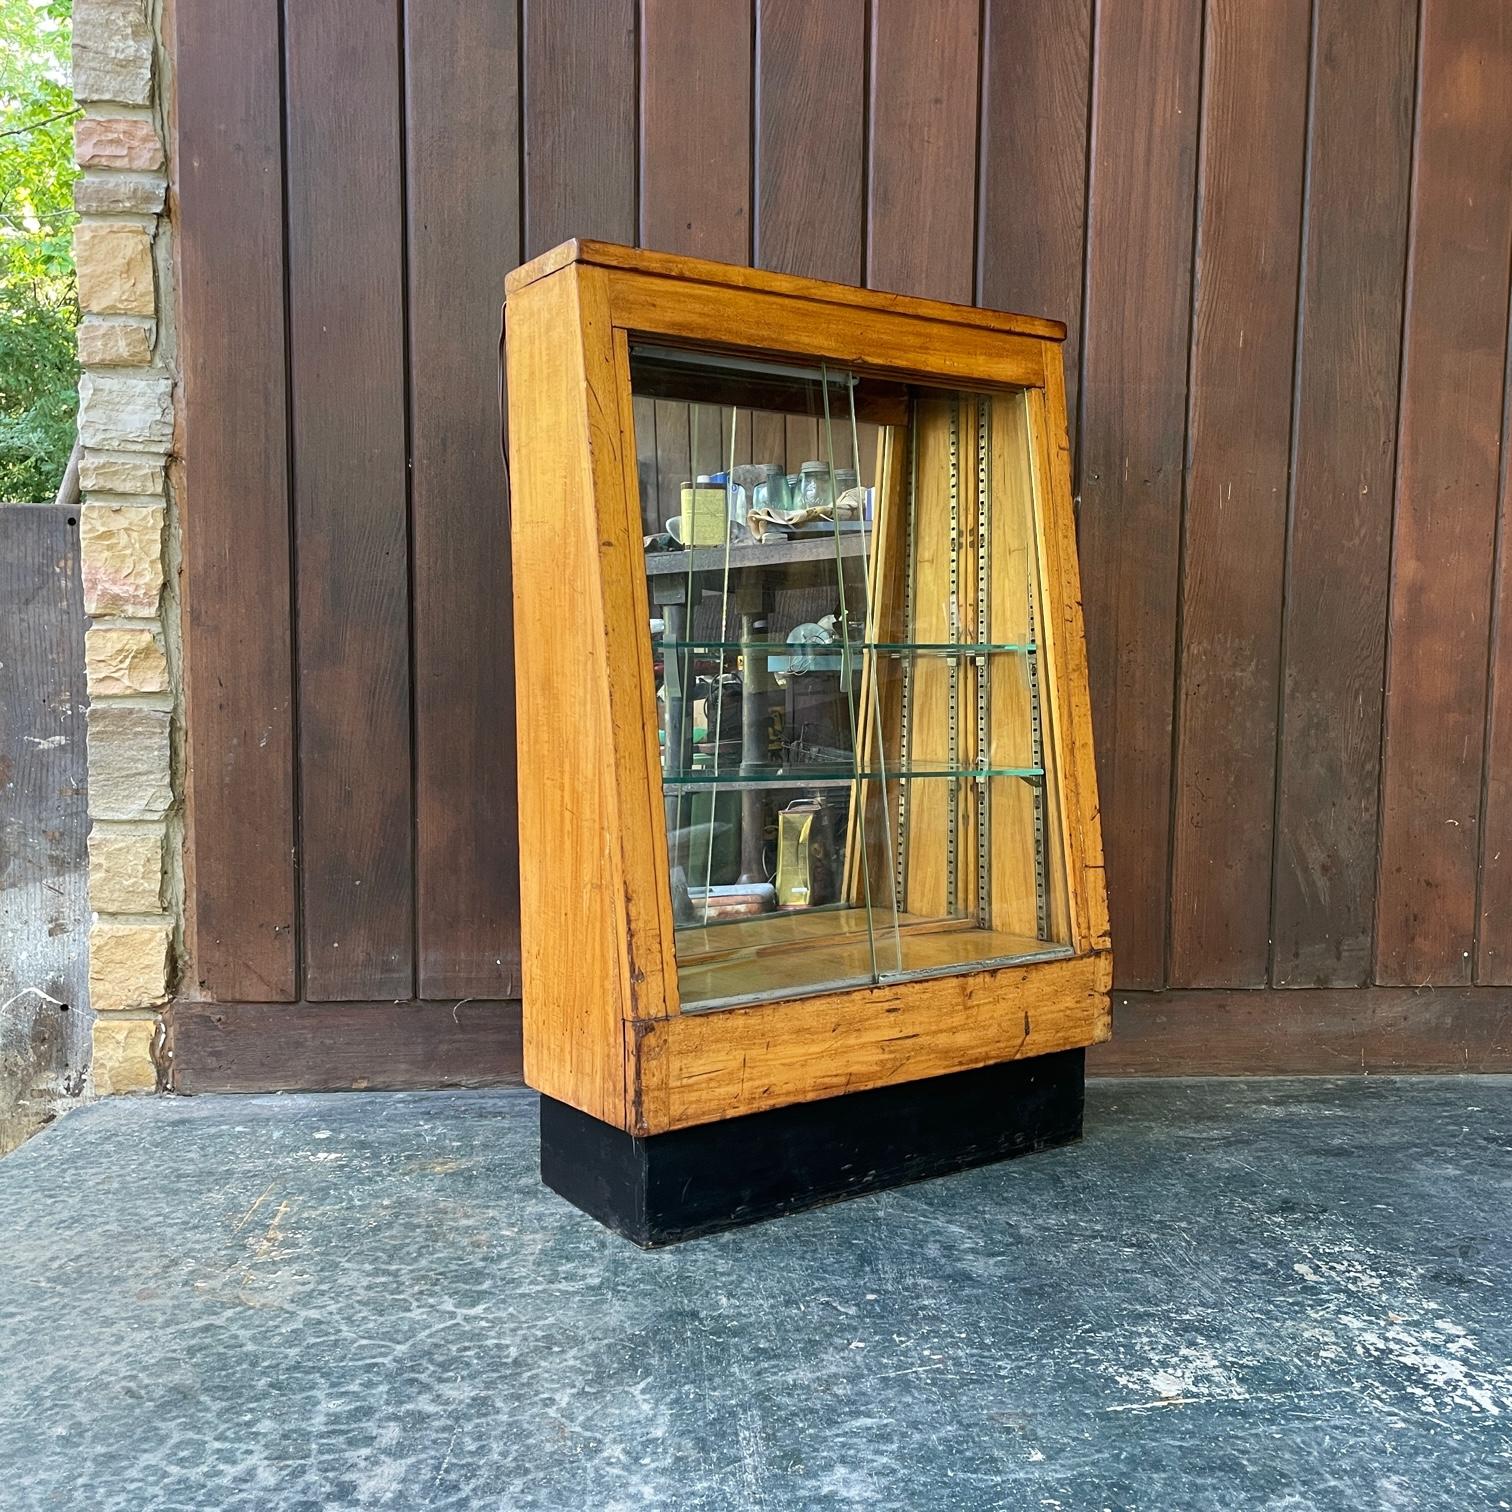 Heavily Worn and Patinated, Scarred and Marred. 

2 Sliding Glass Door Slant Front Display Floor Case. Lighting was added later and is working.  More shelves could be added, but it comes with 2.